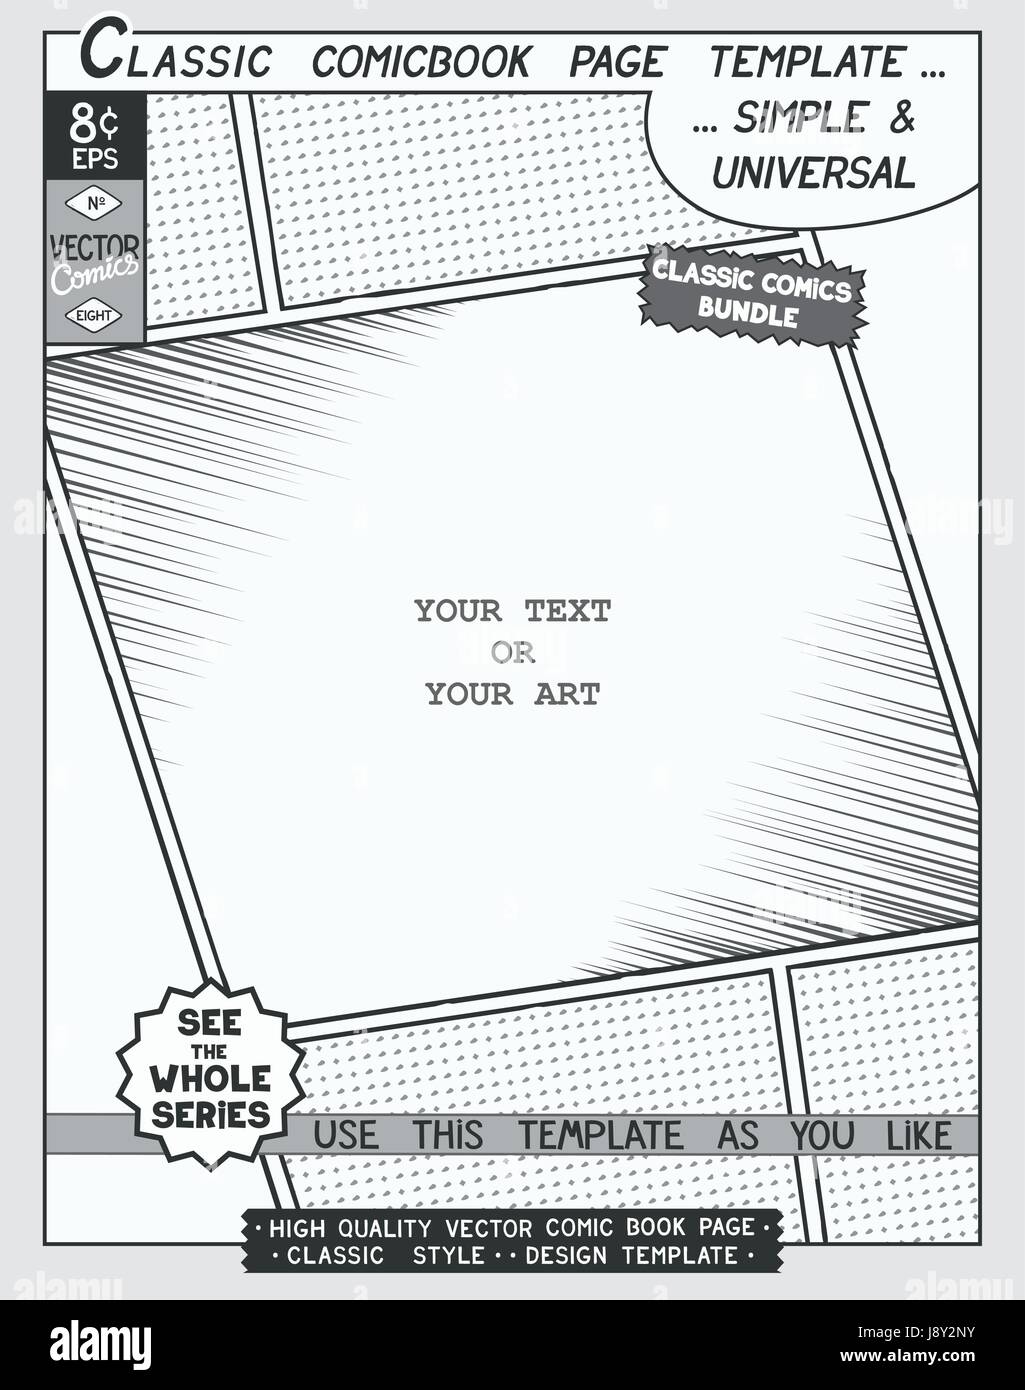 Comic Book Styles And Layouts  Comic book layout, Comic book template,  Comic book style